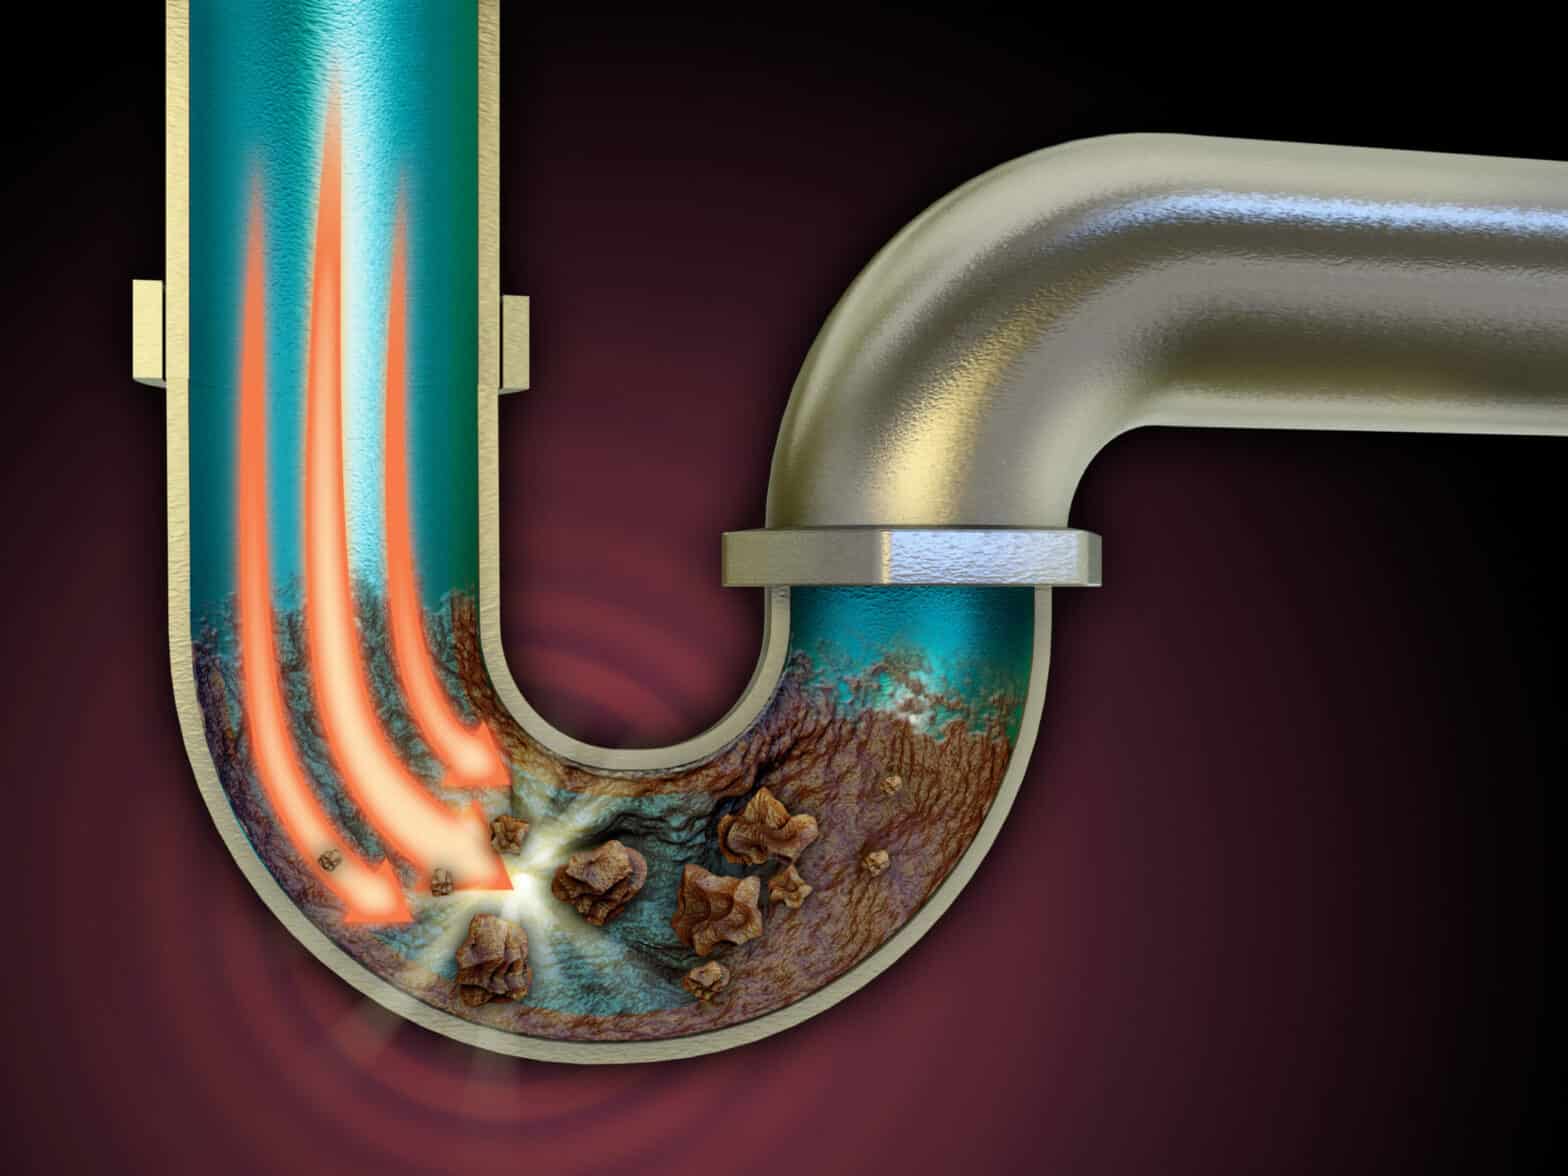 A clean drain with flowing water, representing the importance of professional drain cleaning in Los Angeles homes.